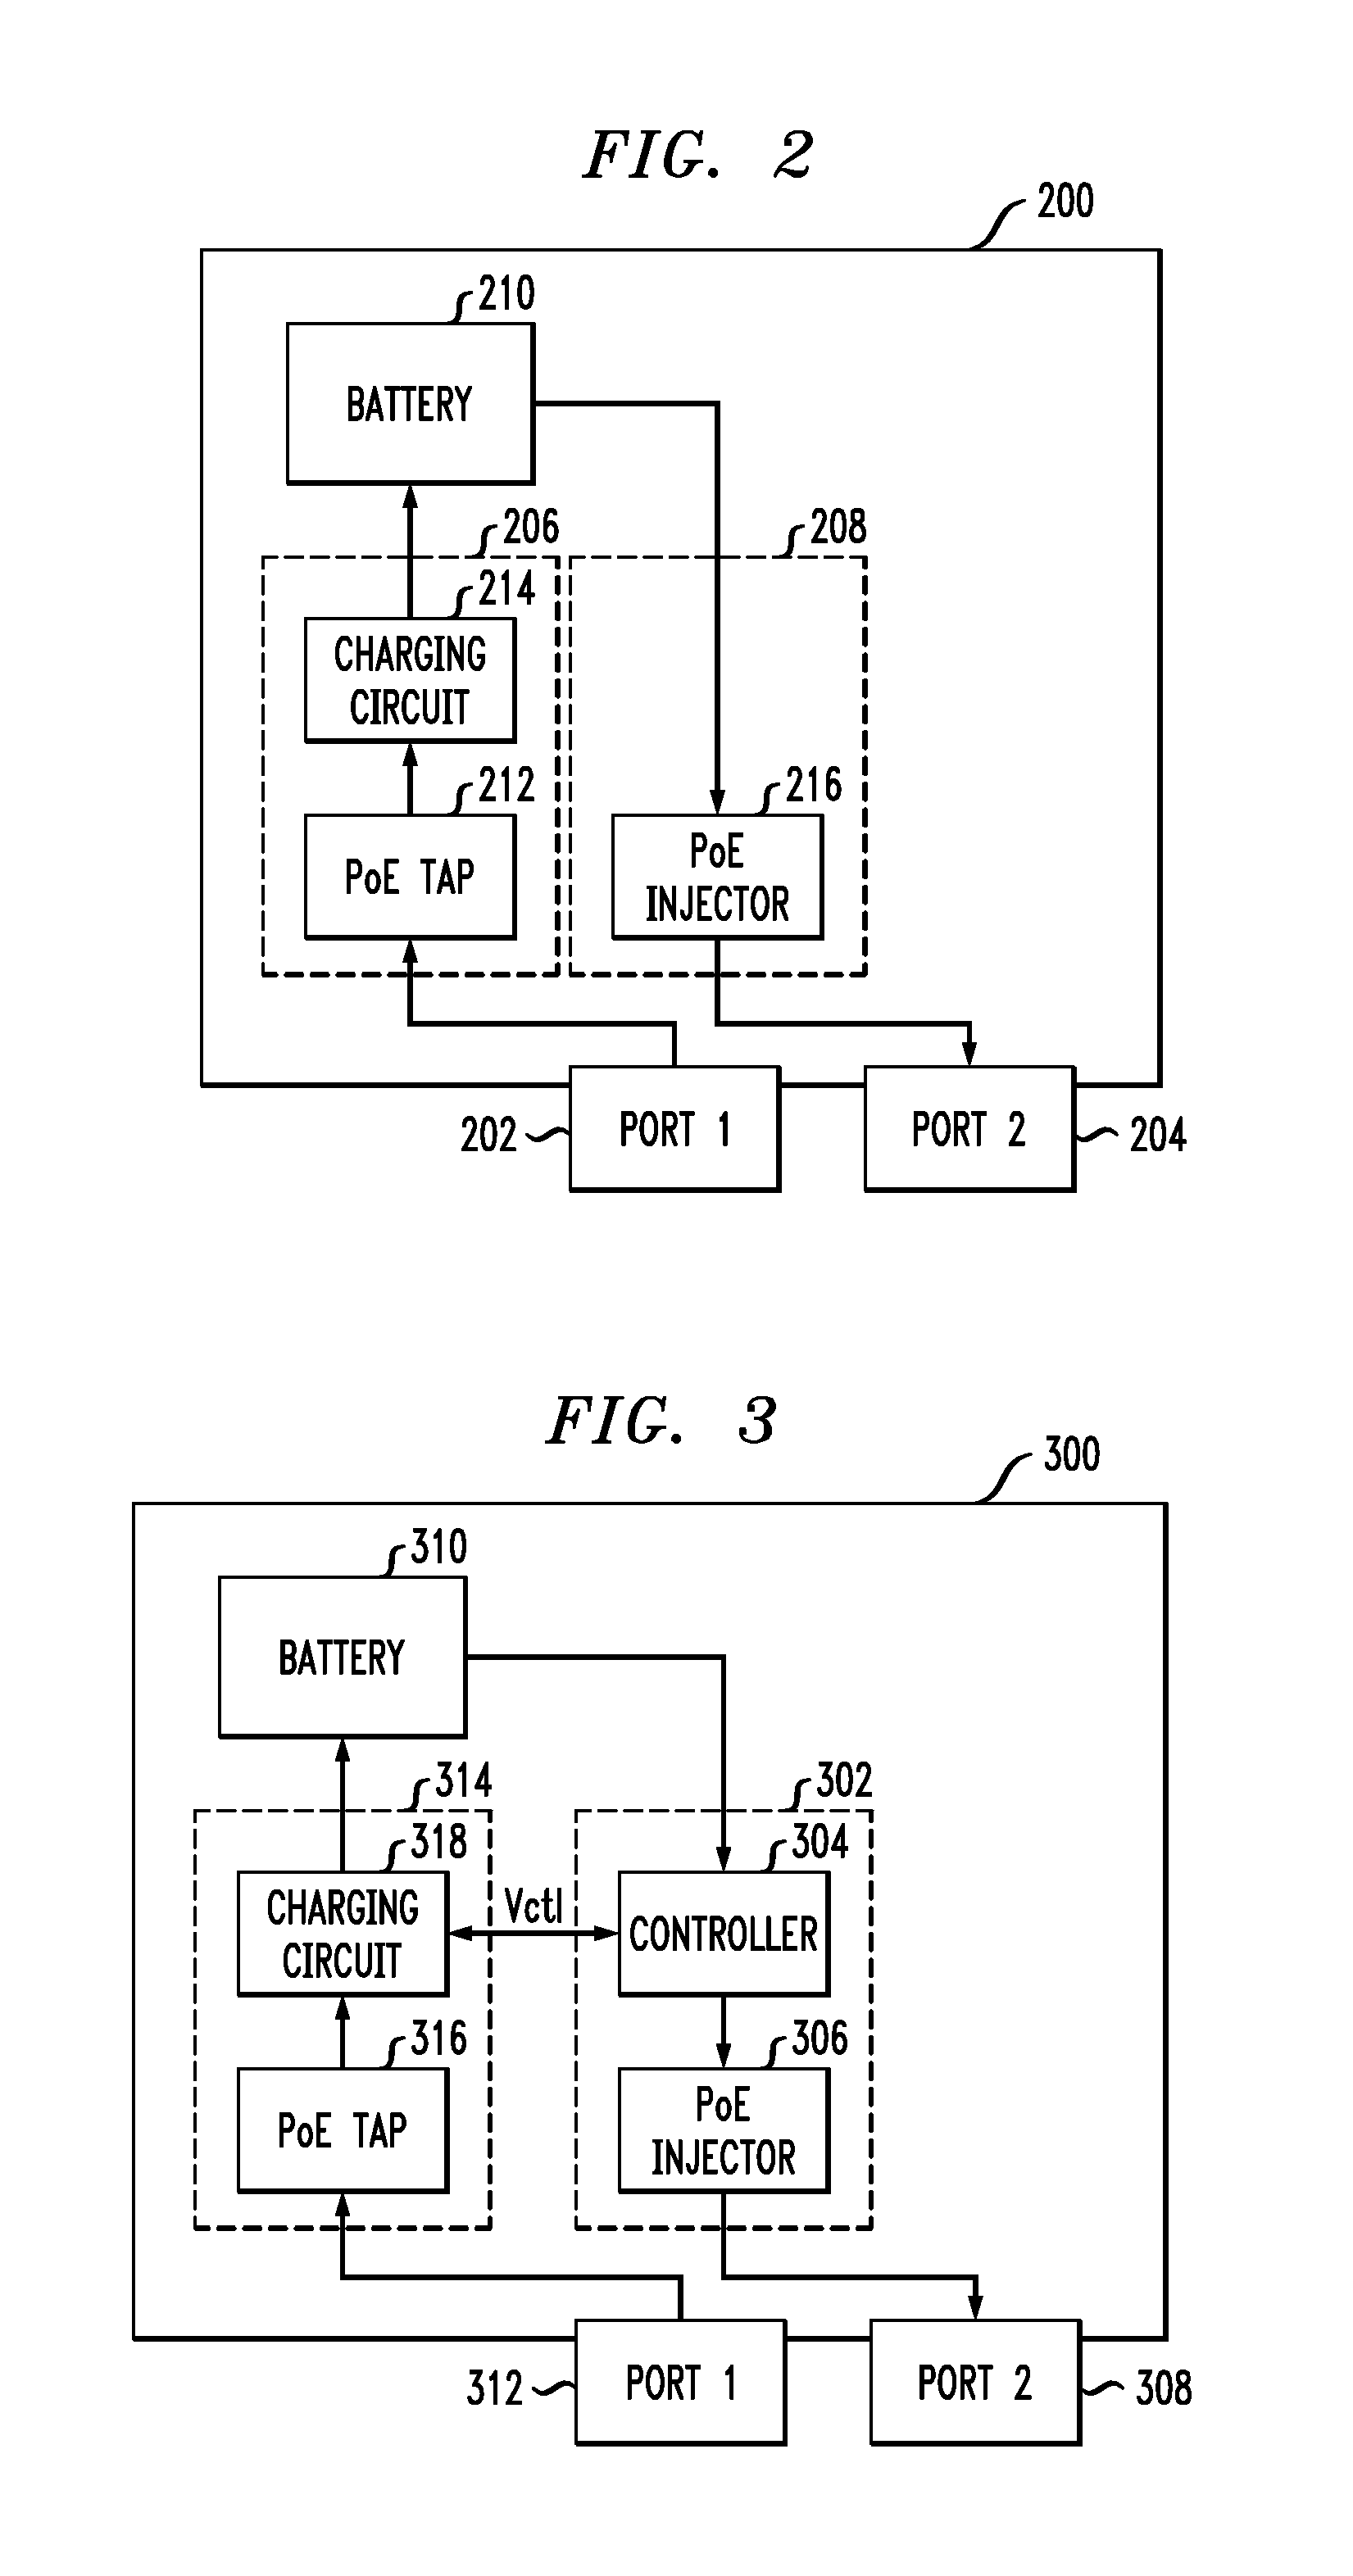 Power Sharing Among Portable Electronic Devices